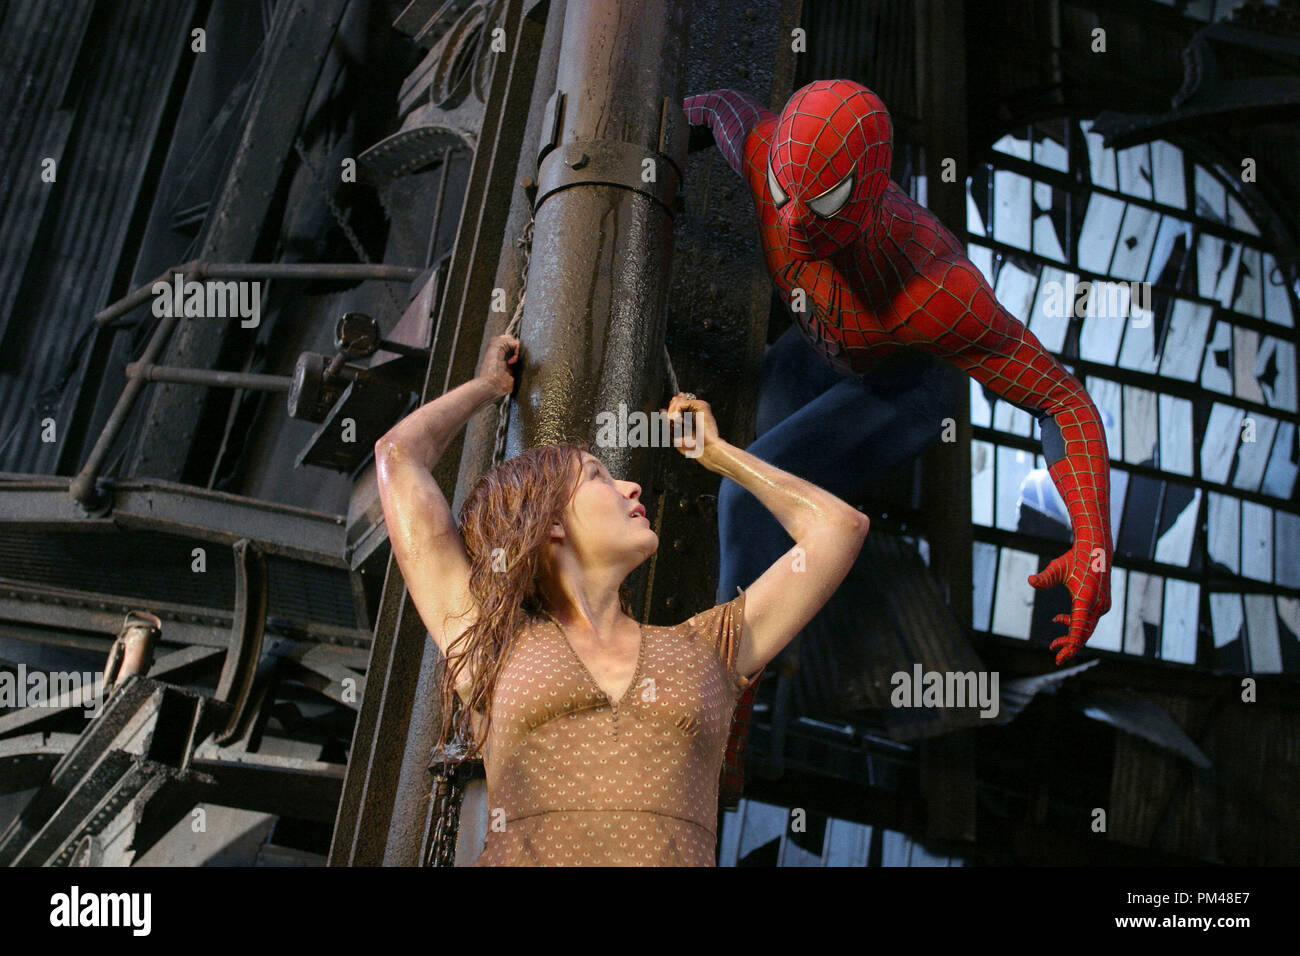 Spider-Man 2 Kirsten Dunst (Mary Jane Watson) and Tobey Maguire (Peter Parker/Spider-Man)  © 2004 Columbia / Sony Pictures Stock Photo